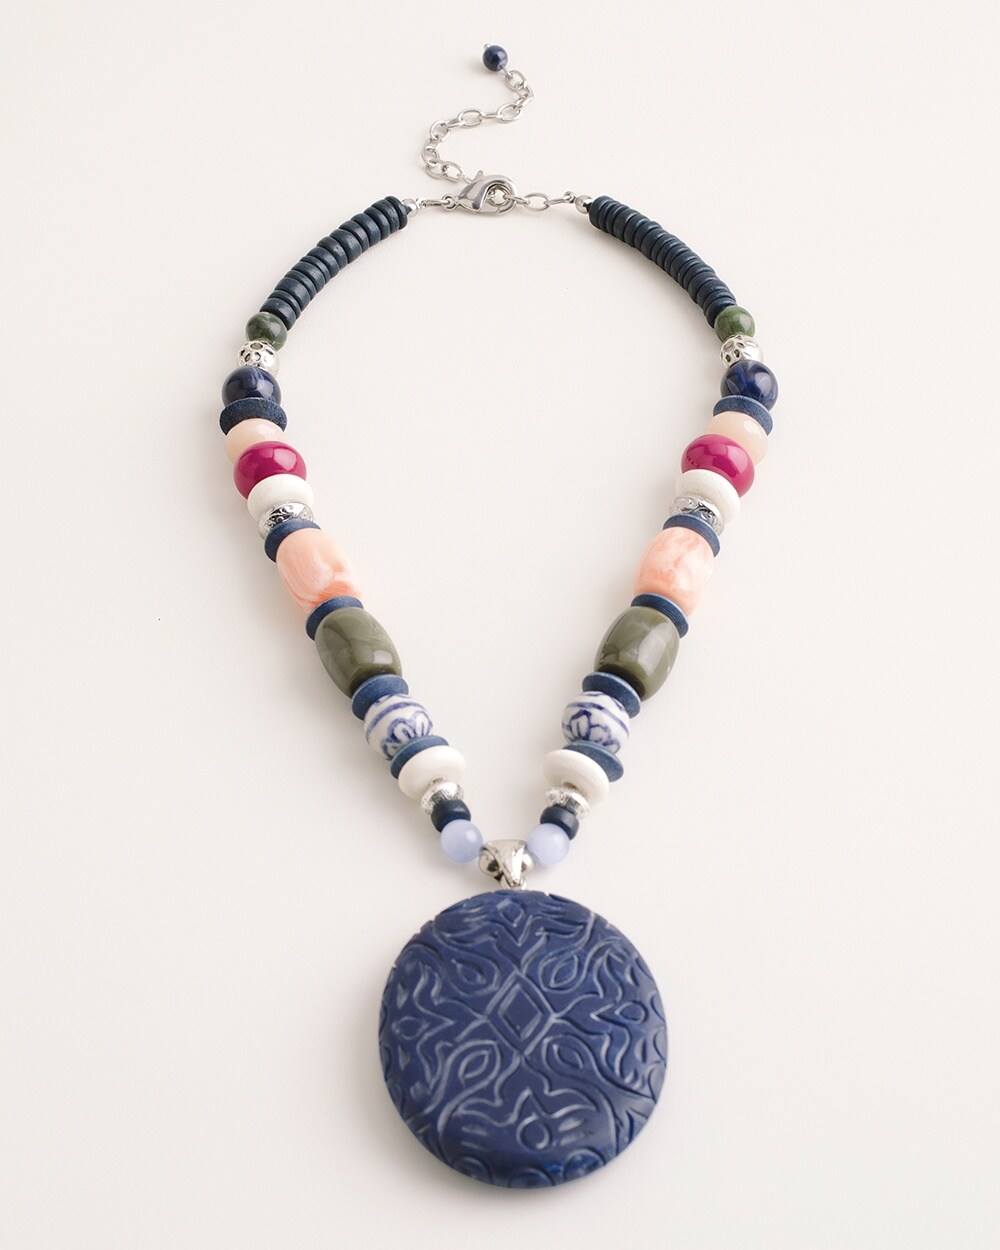 Short Beaded Multi-Colored Pendant Necklace